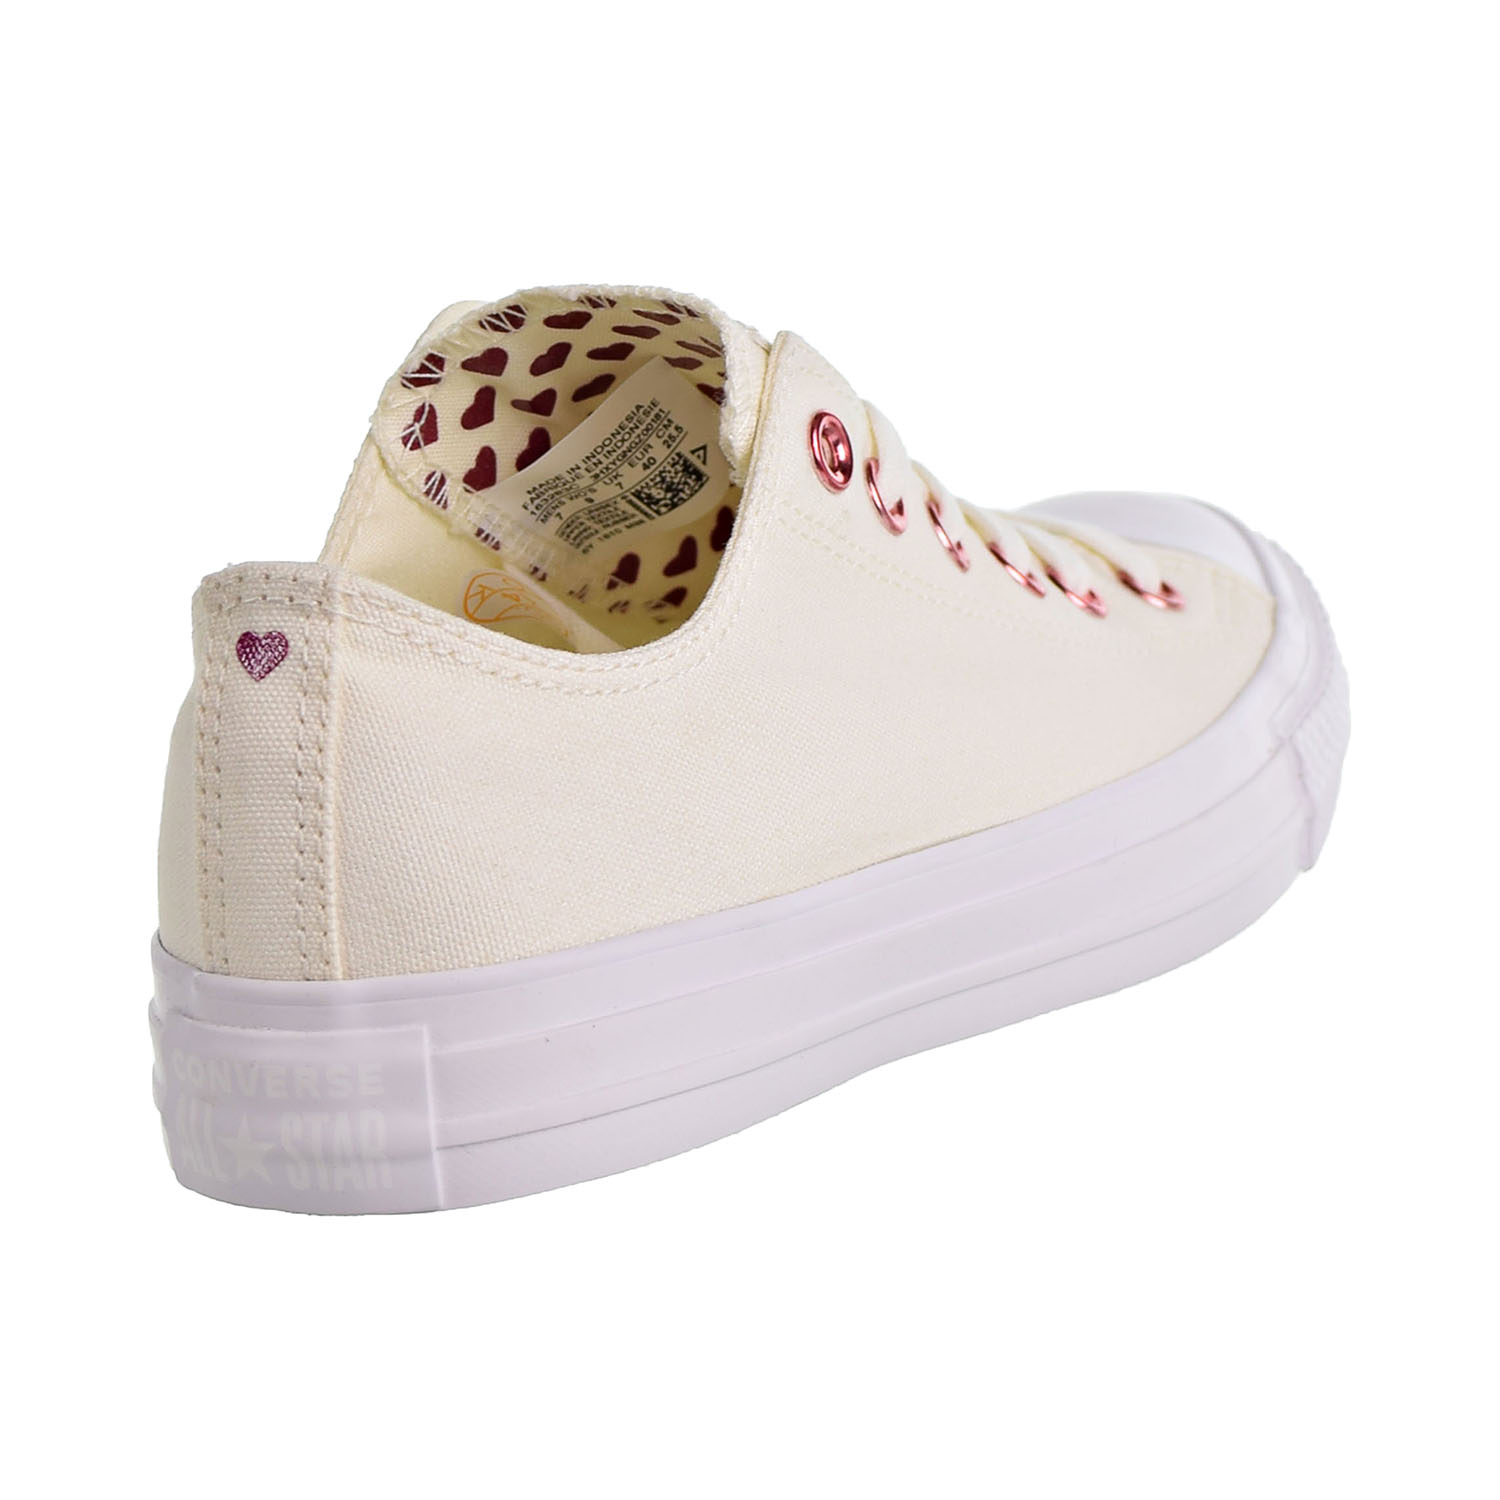 Converse Chuck Taylor All Star Ox Hearts Unisex Shoes Egret-Rhubarb-White 163283c - image 3 of 6